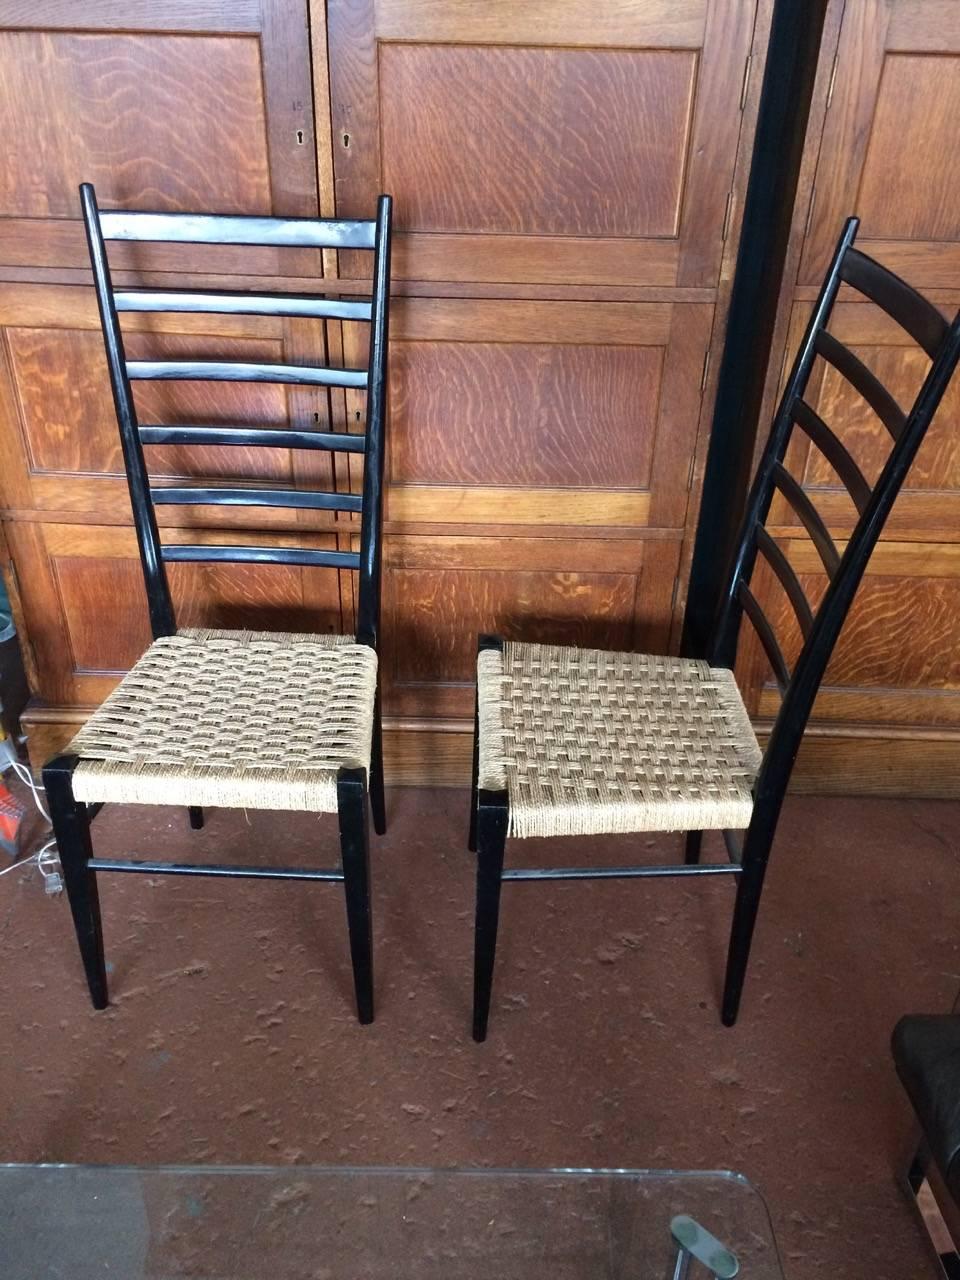 Pair of Gio Ponti high ladder back chairs, lacquered black wood frames with with rushed seats.

Avantgarden Ltd. cultivates unexpected and exceptional lighting, furniture and design.  To view items in person please visit our showroom in Pound Ridge,